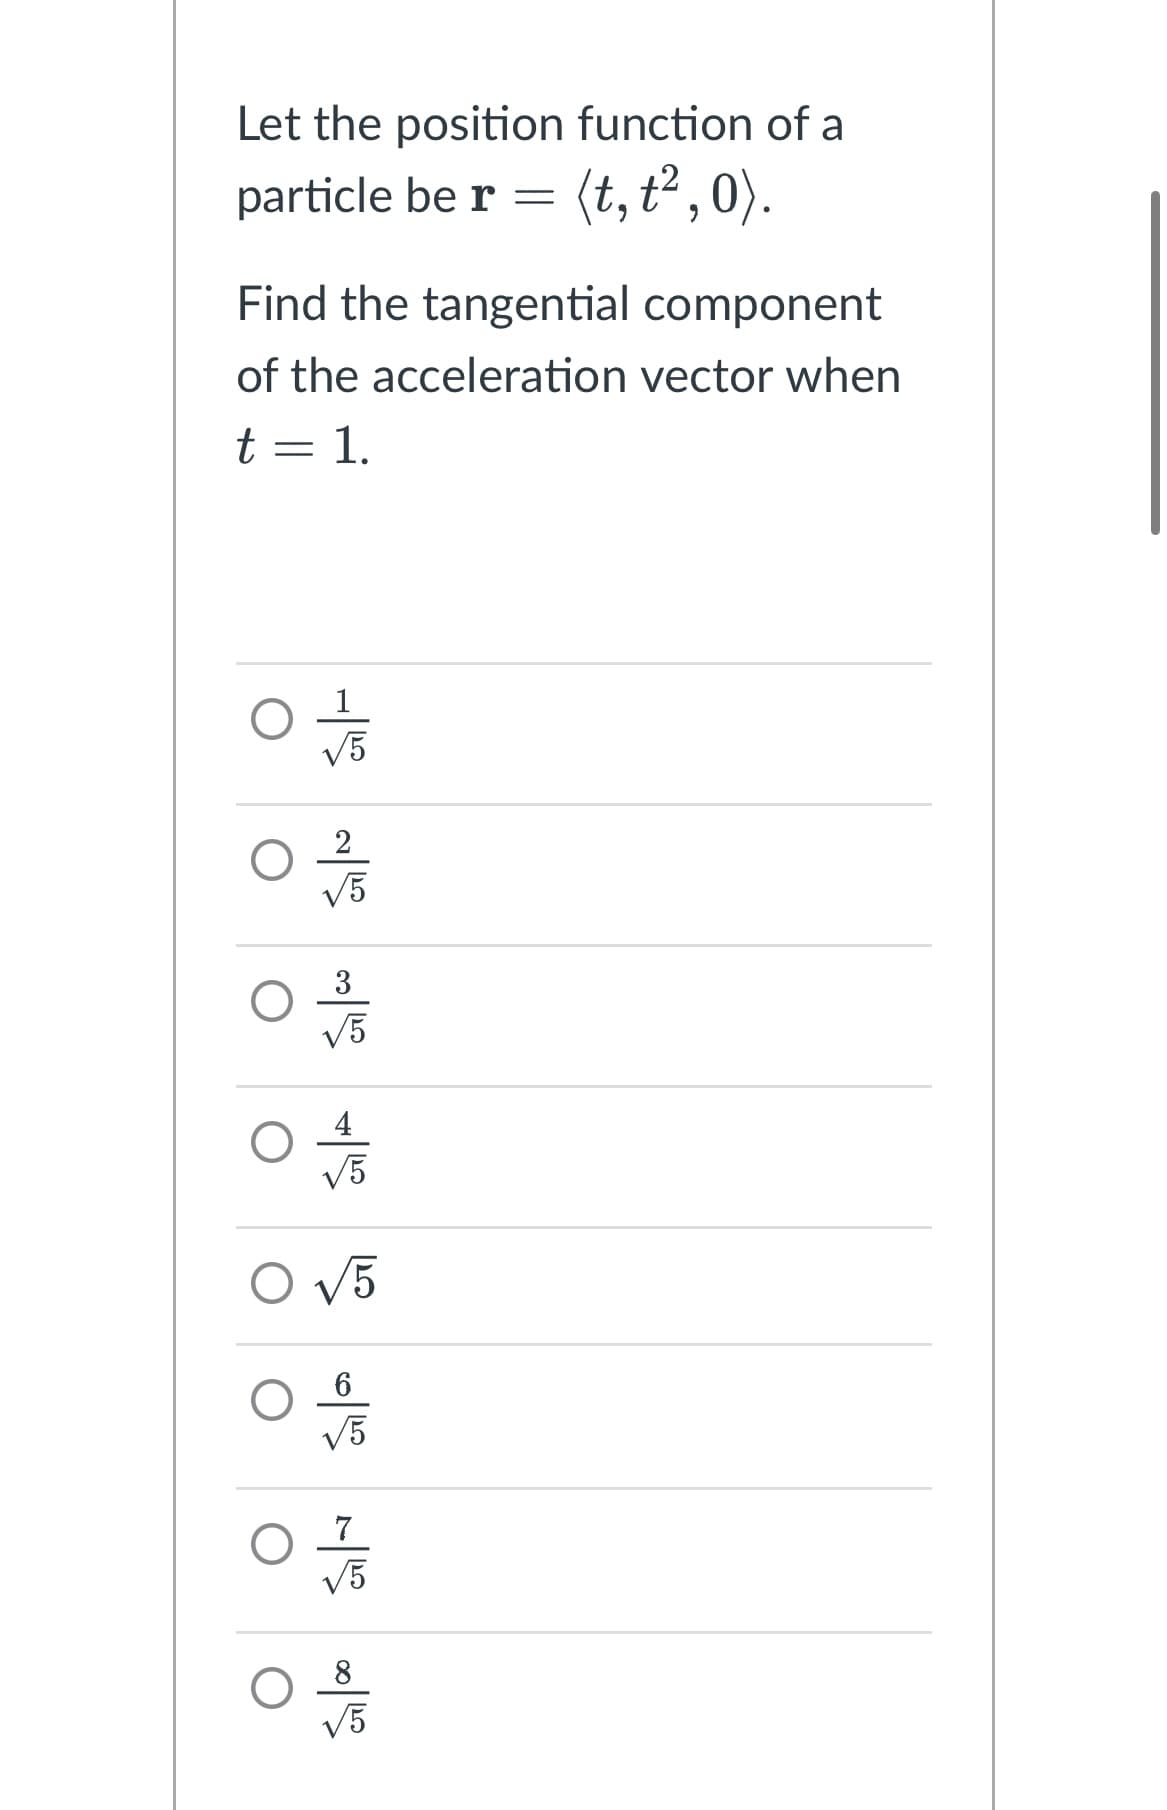 Let the position function of a
particle be r= (t, t²,0).
Find the tangential component
of the acceleration vector when
t = 1.
헤헤 에헤헤 하
√5
ㅇㅎ
ㅇㅎ
4
V5
O V5
7
√5
8
√5